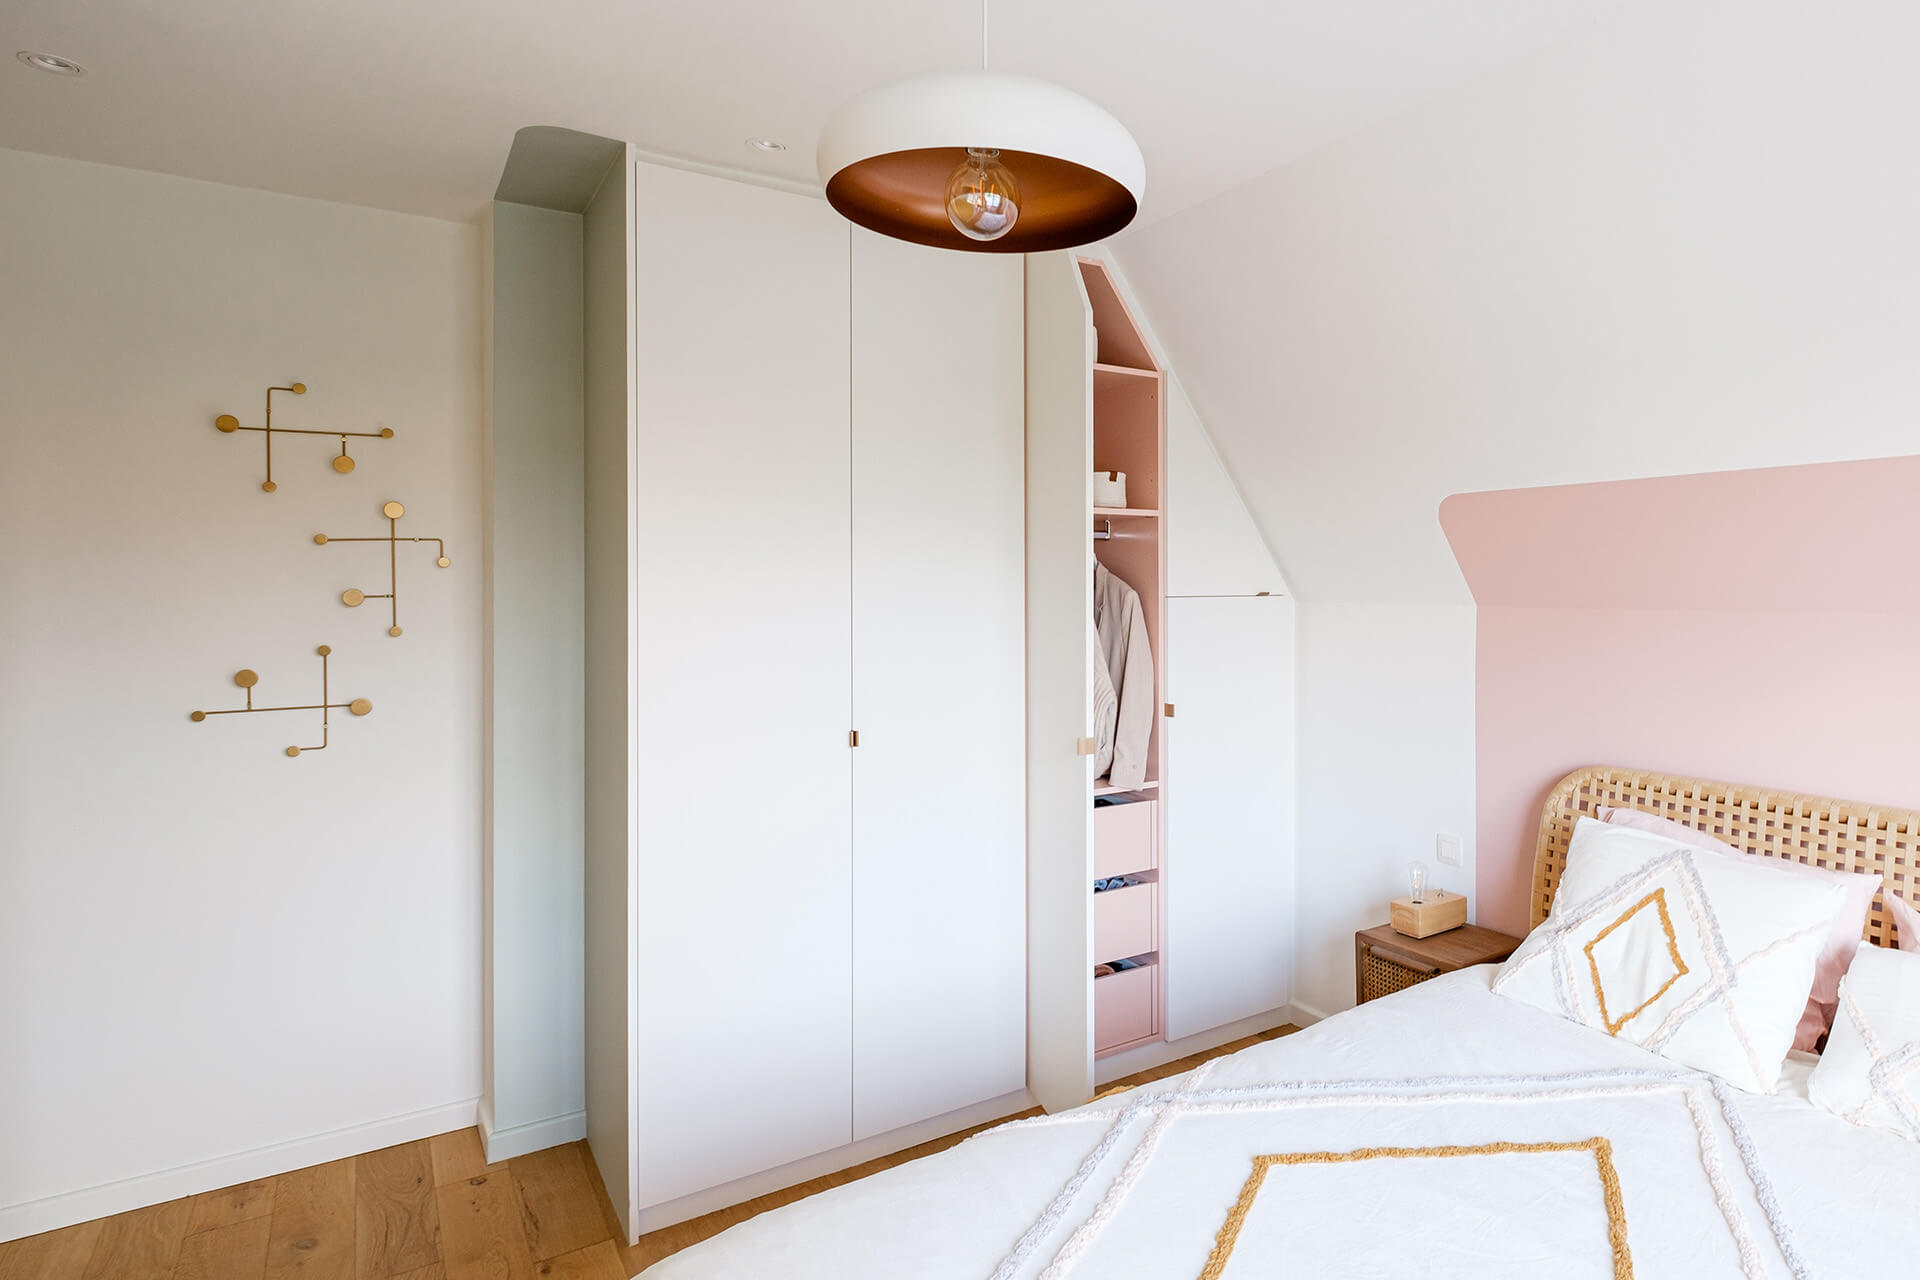 built in closet with subtle pink touch inside in girls bedroom